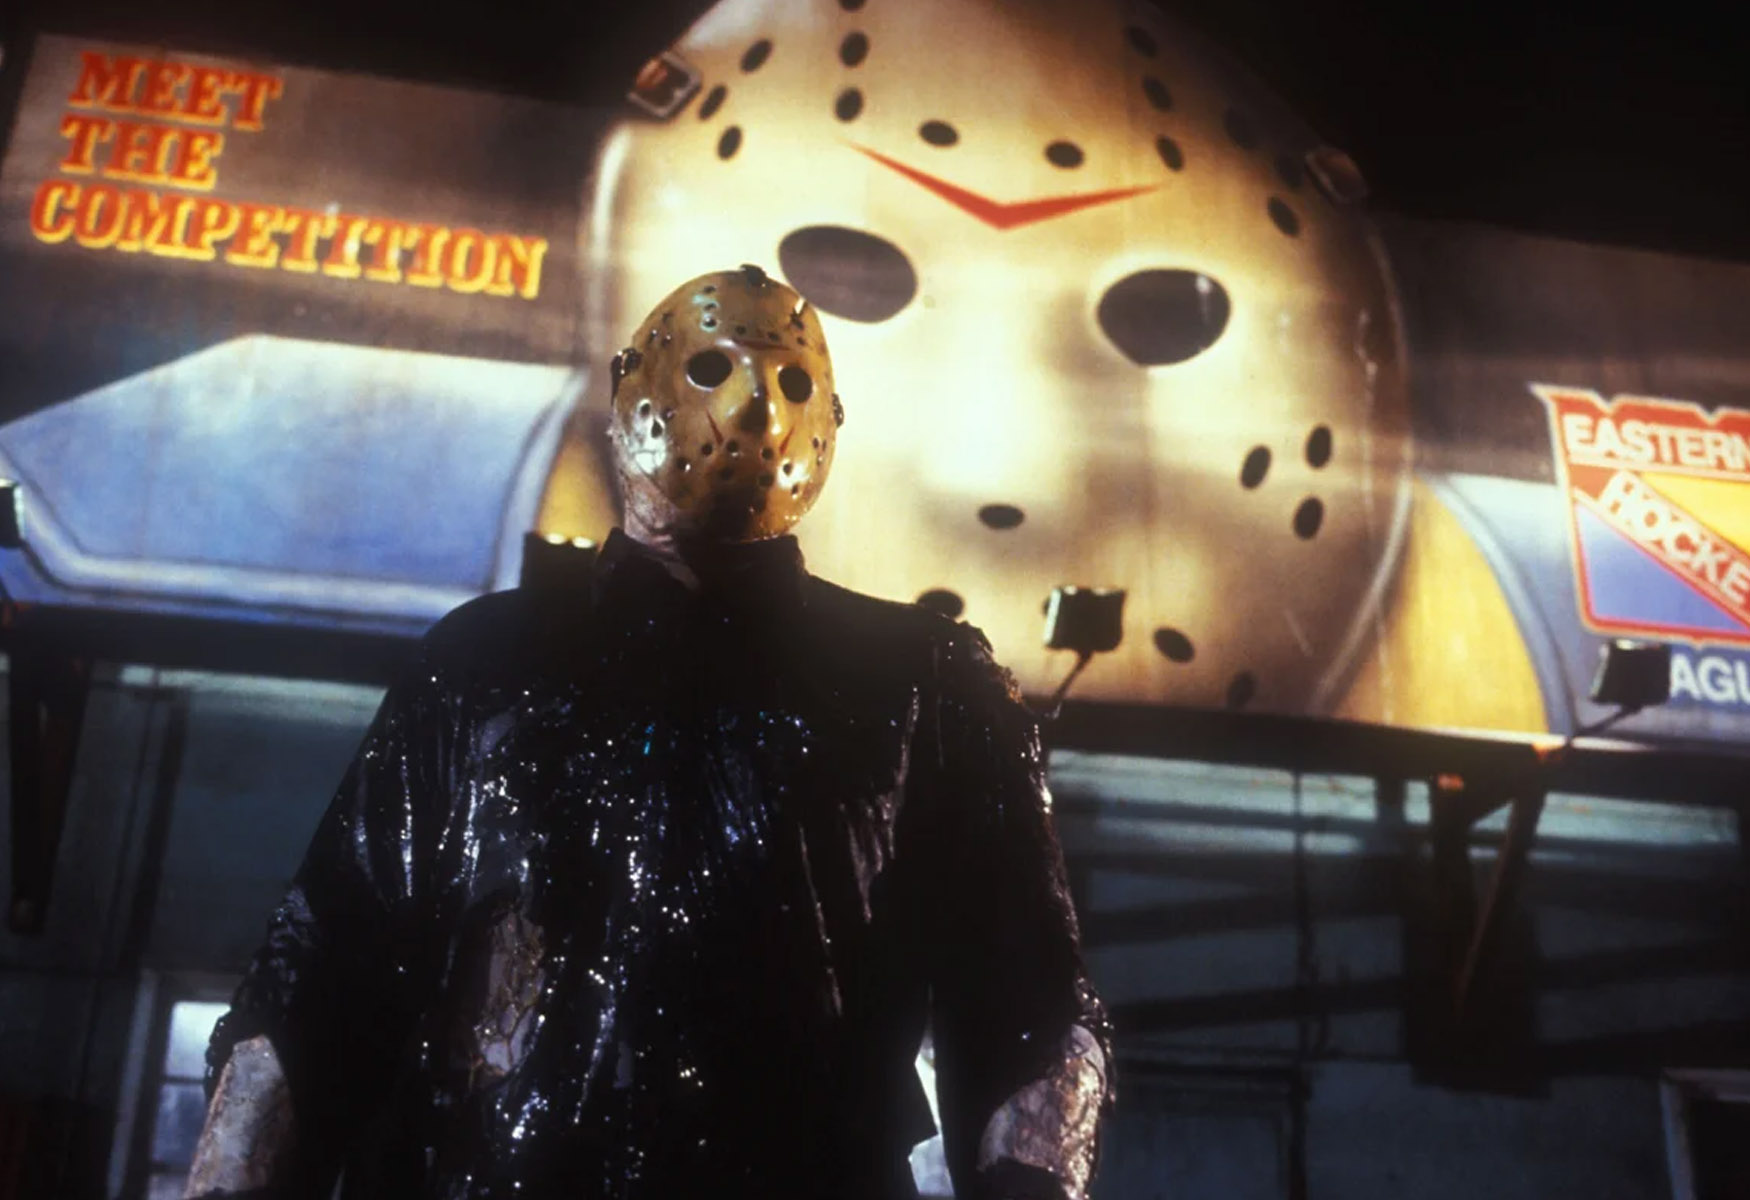 New Blood: The Return Of Jason Vorhees In Friday The 13th Part VII